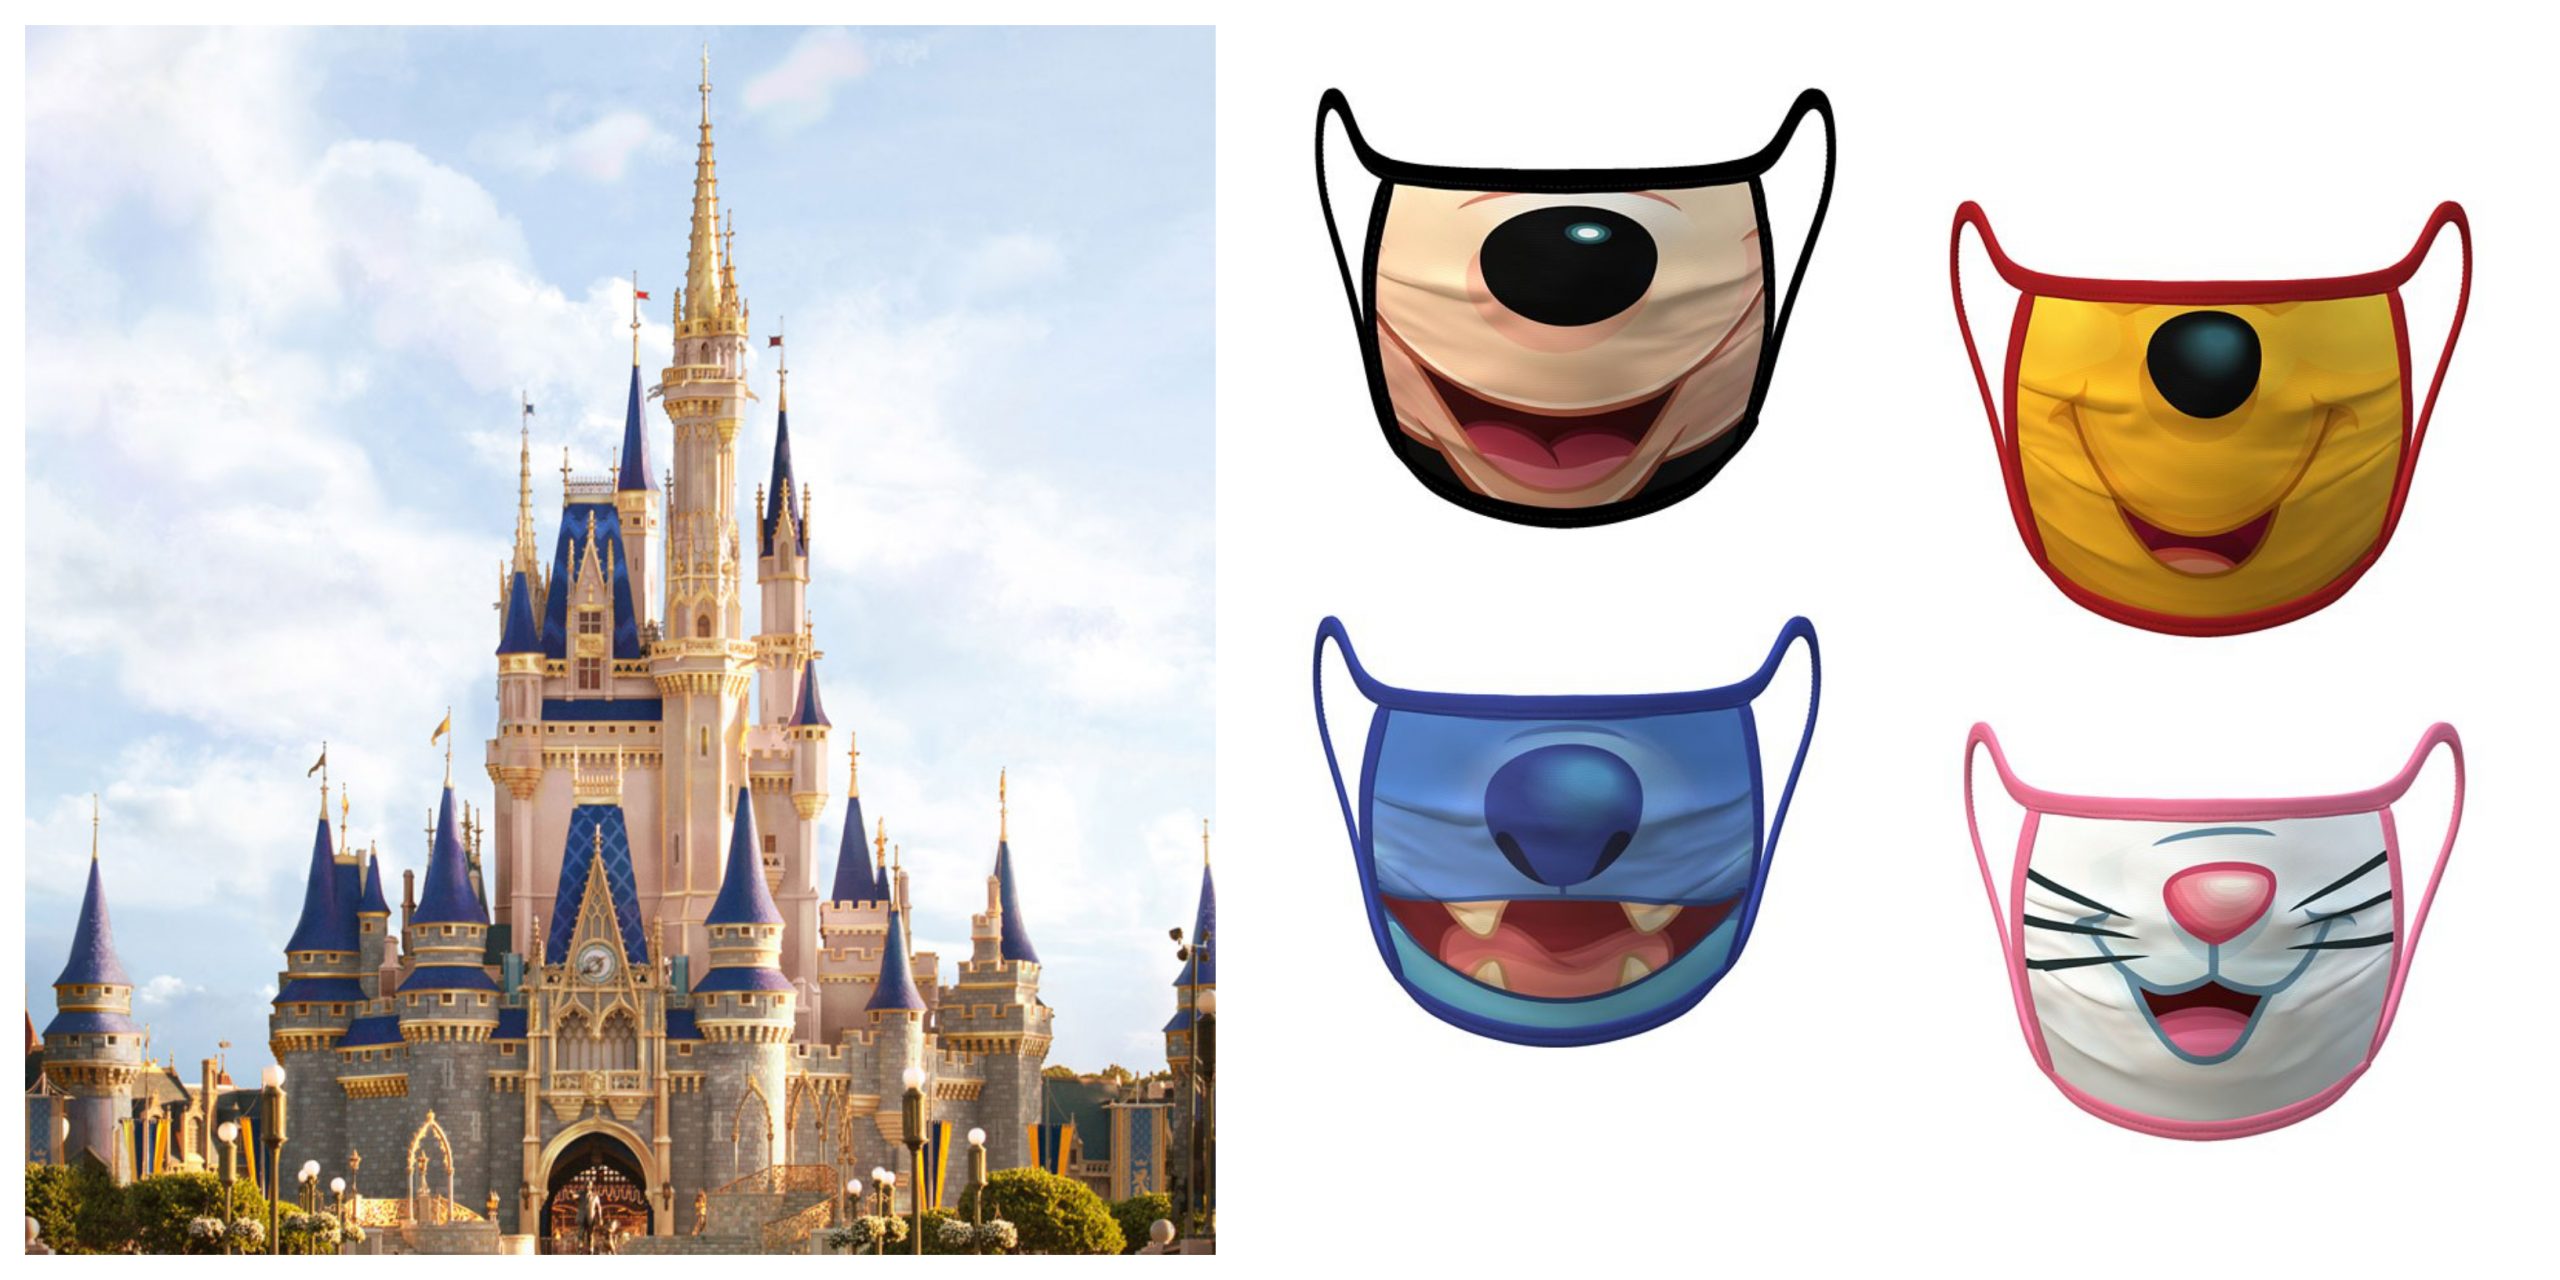 Mother suing Disney for barring her autistic child over facemask policy